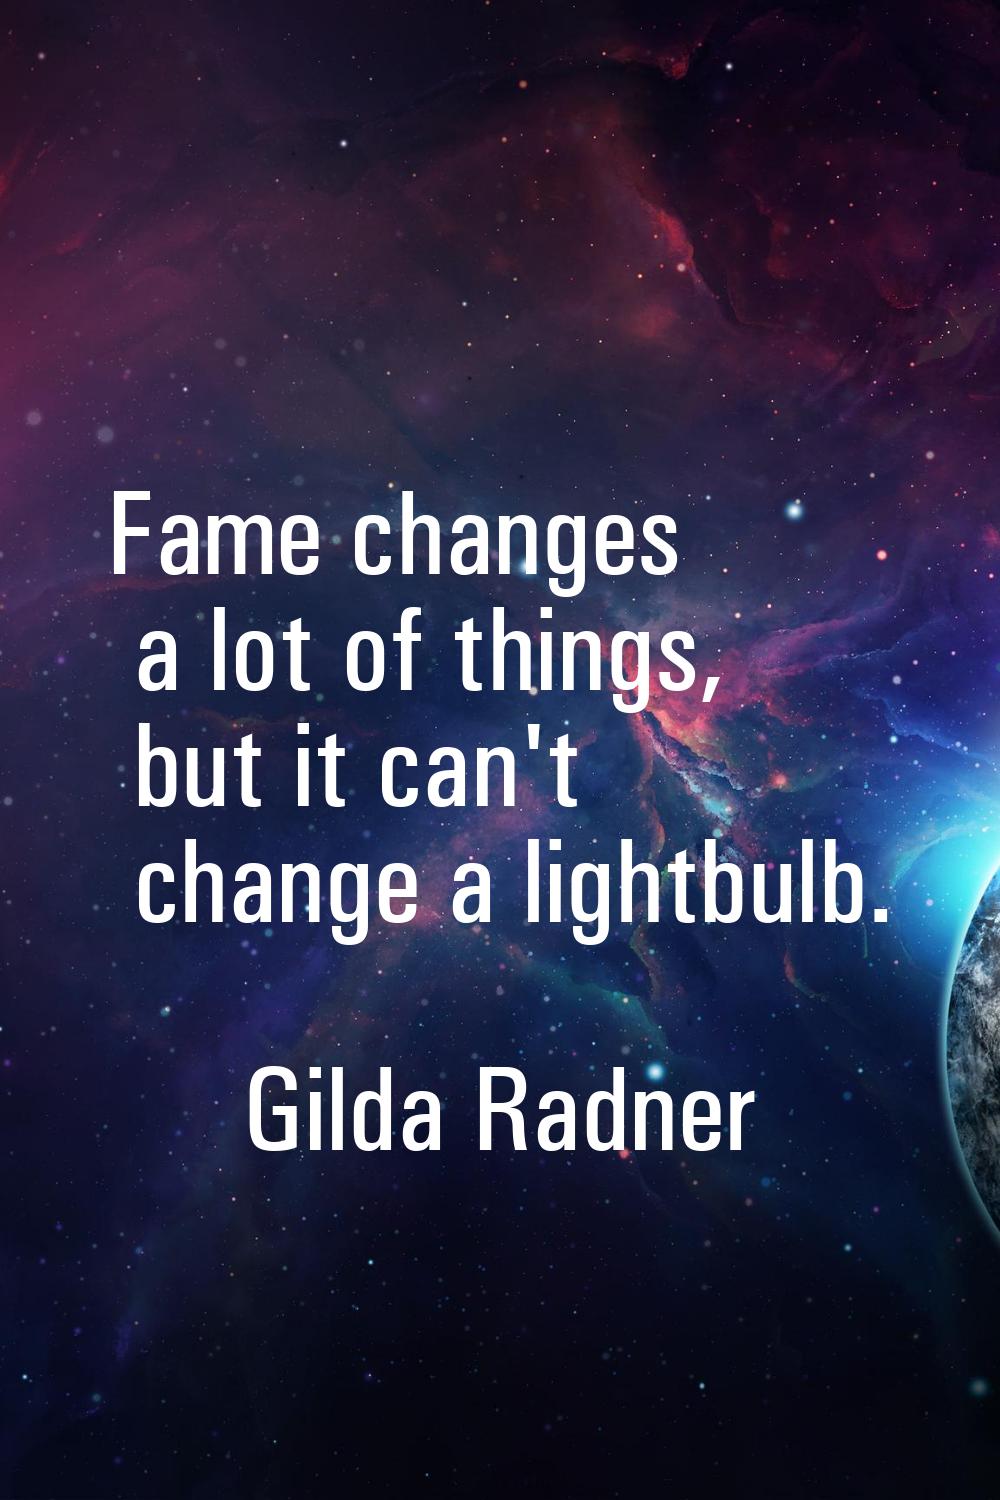 Fame changes a lot of things, but it can't change a lightbulb.